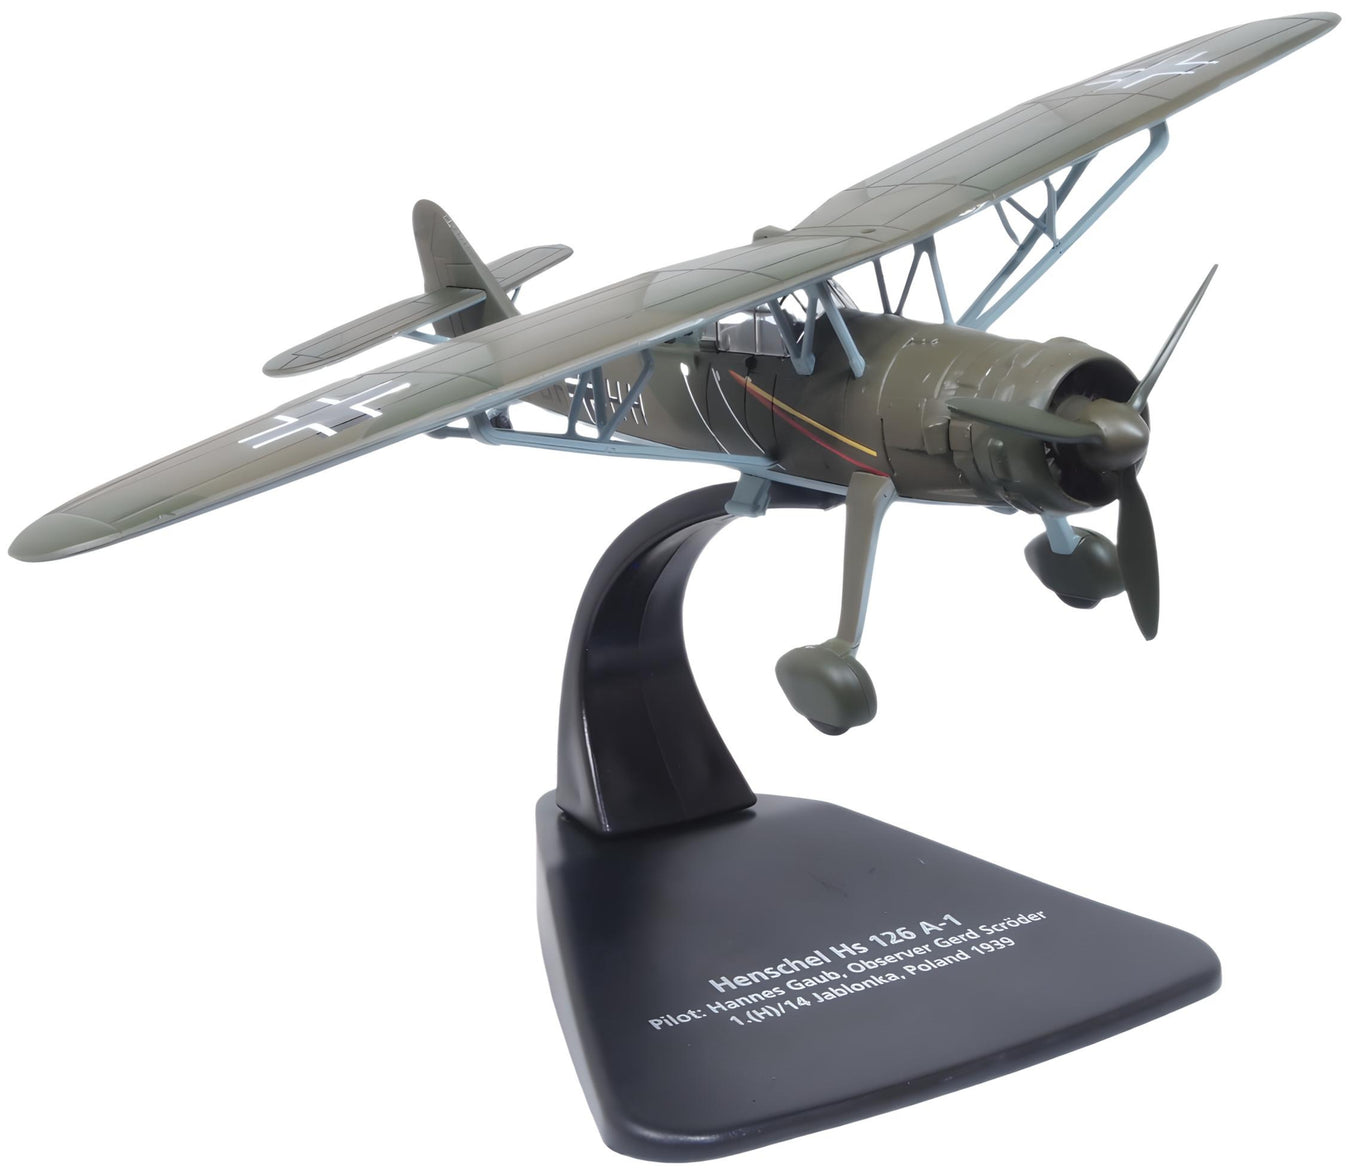 Model Aircraft 1:72 Scale Diecast from Oxford Diecast.